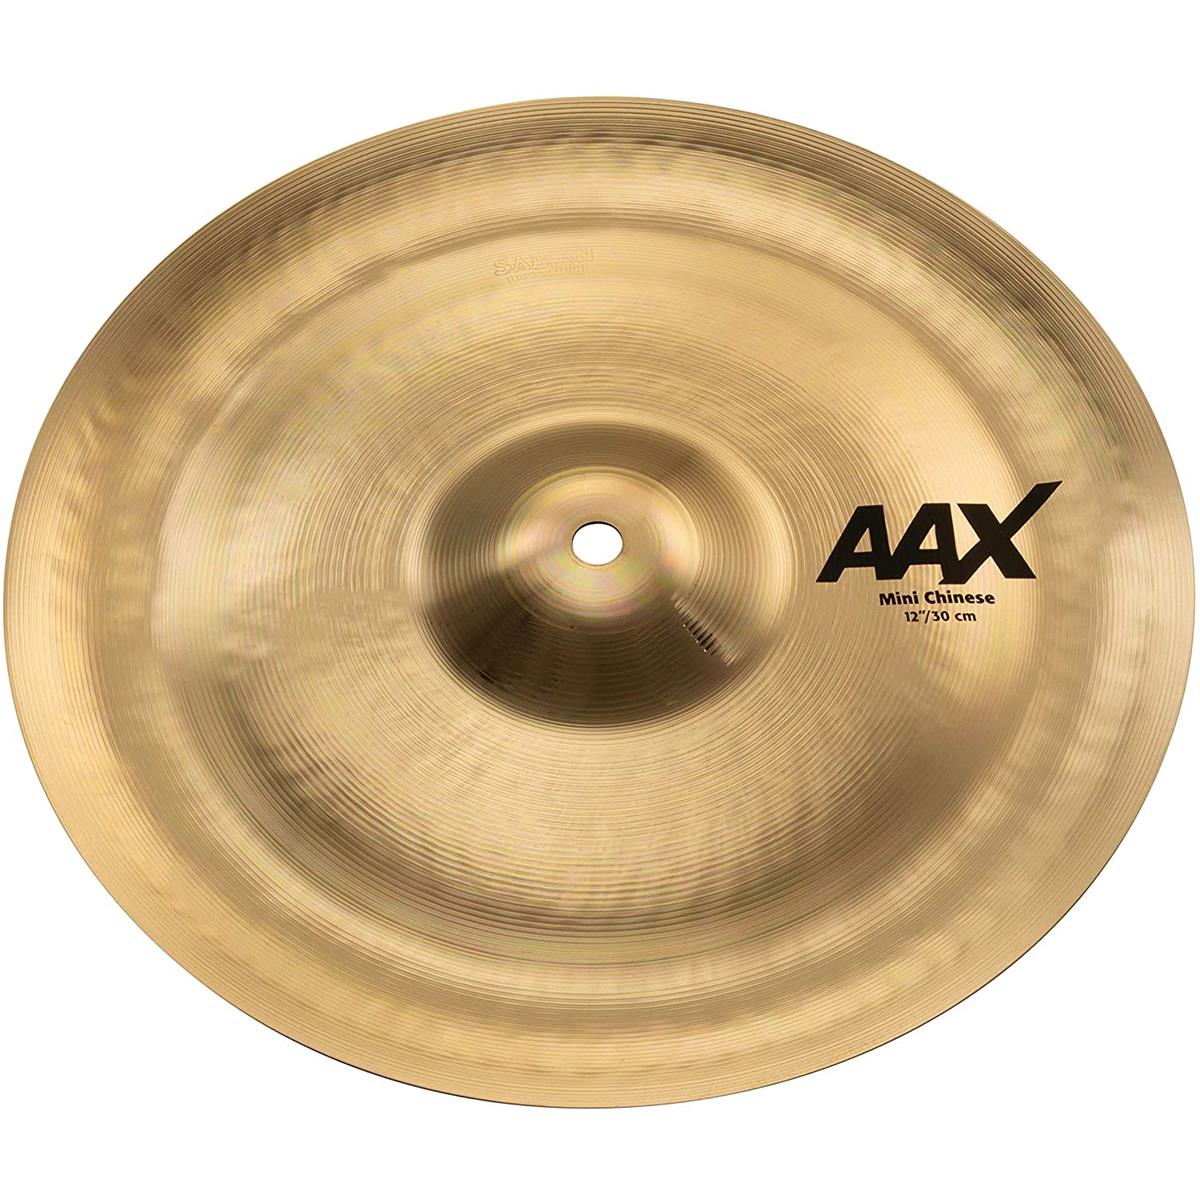 Sabian 12" AAX Mini Chinese Cymbal, Thin, Brilliant Finish Aggressive accenting power in the form of cutting, raw attack and quick decay rate is what the SABIAN 12" AAX Mini Chinese is all about. The SABIAN AAX series delivers consistently bright, crisp, clear and cutting responses - AAX is the ultimate Modern Bright sound!